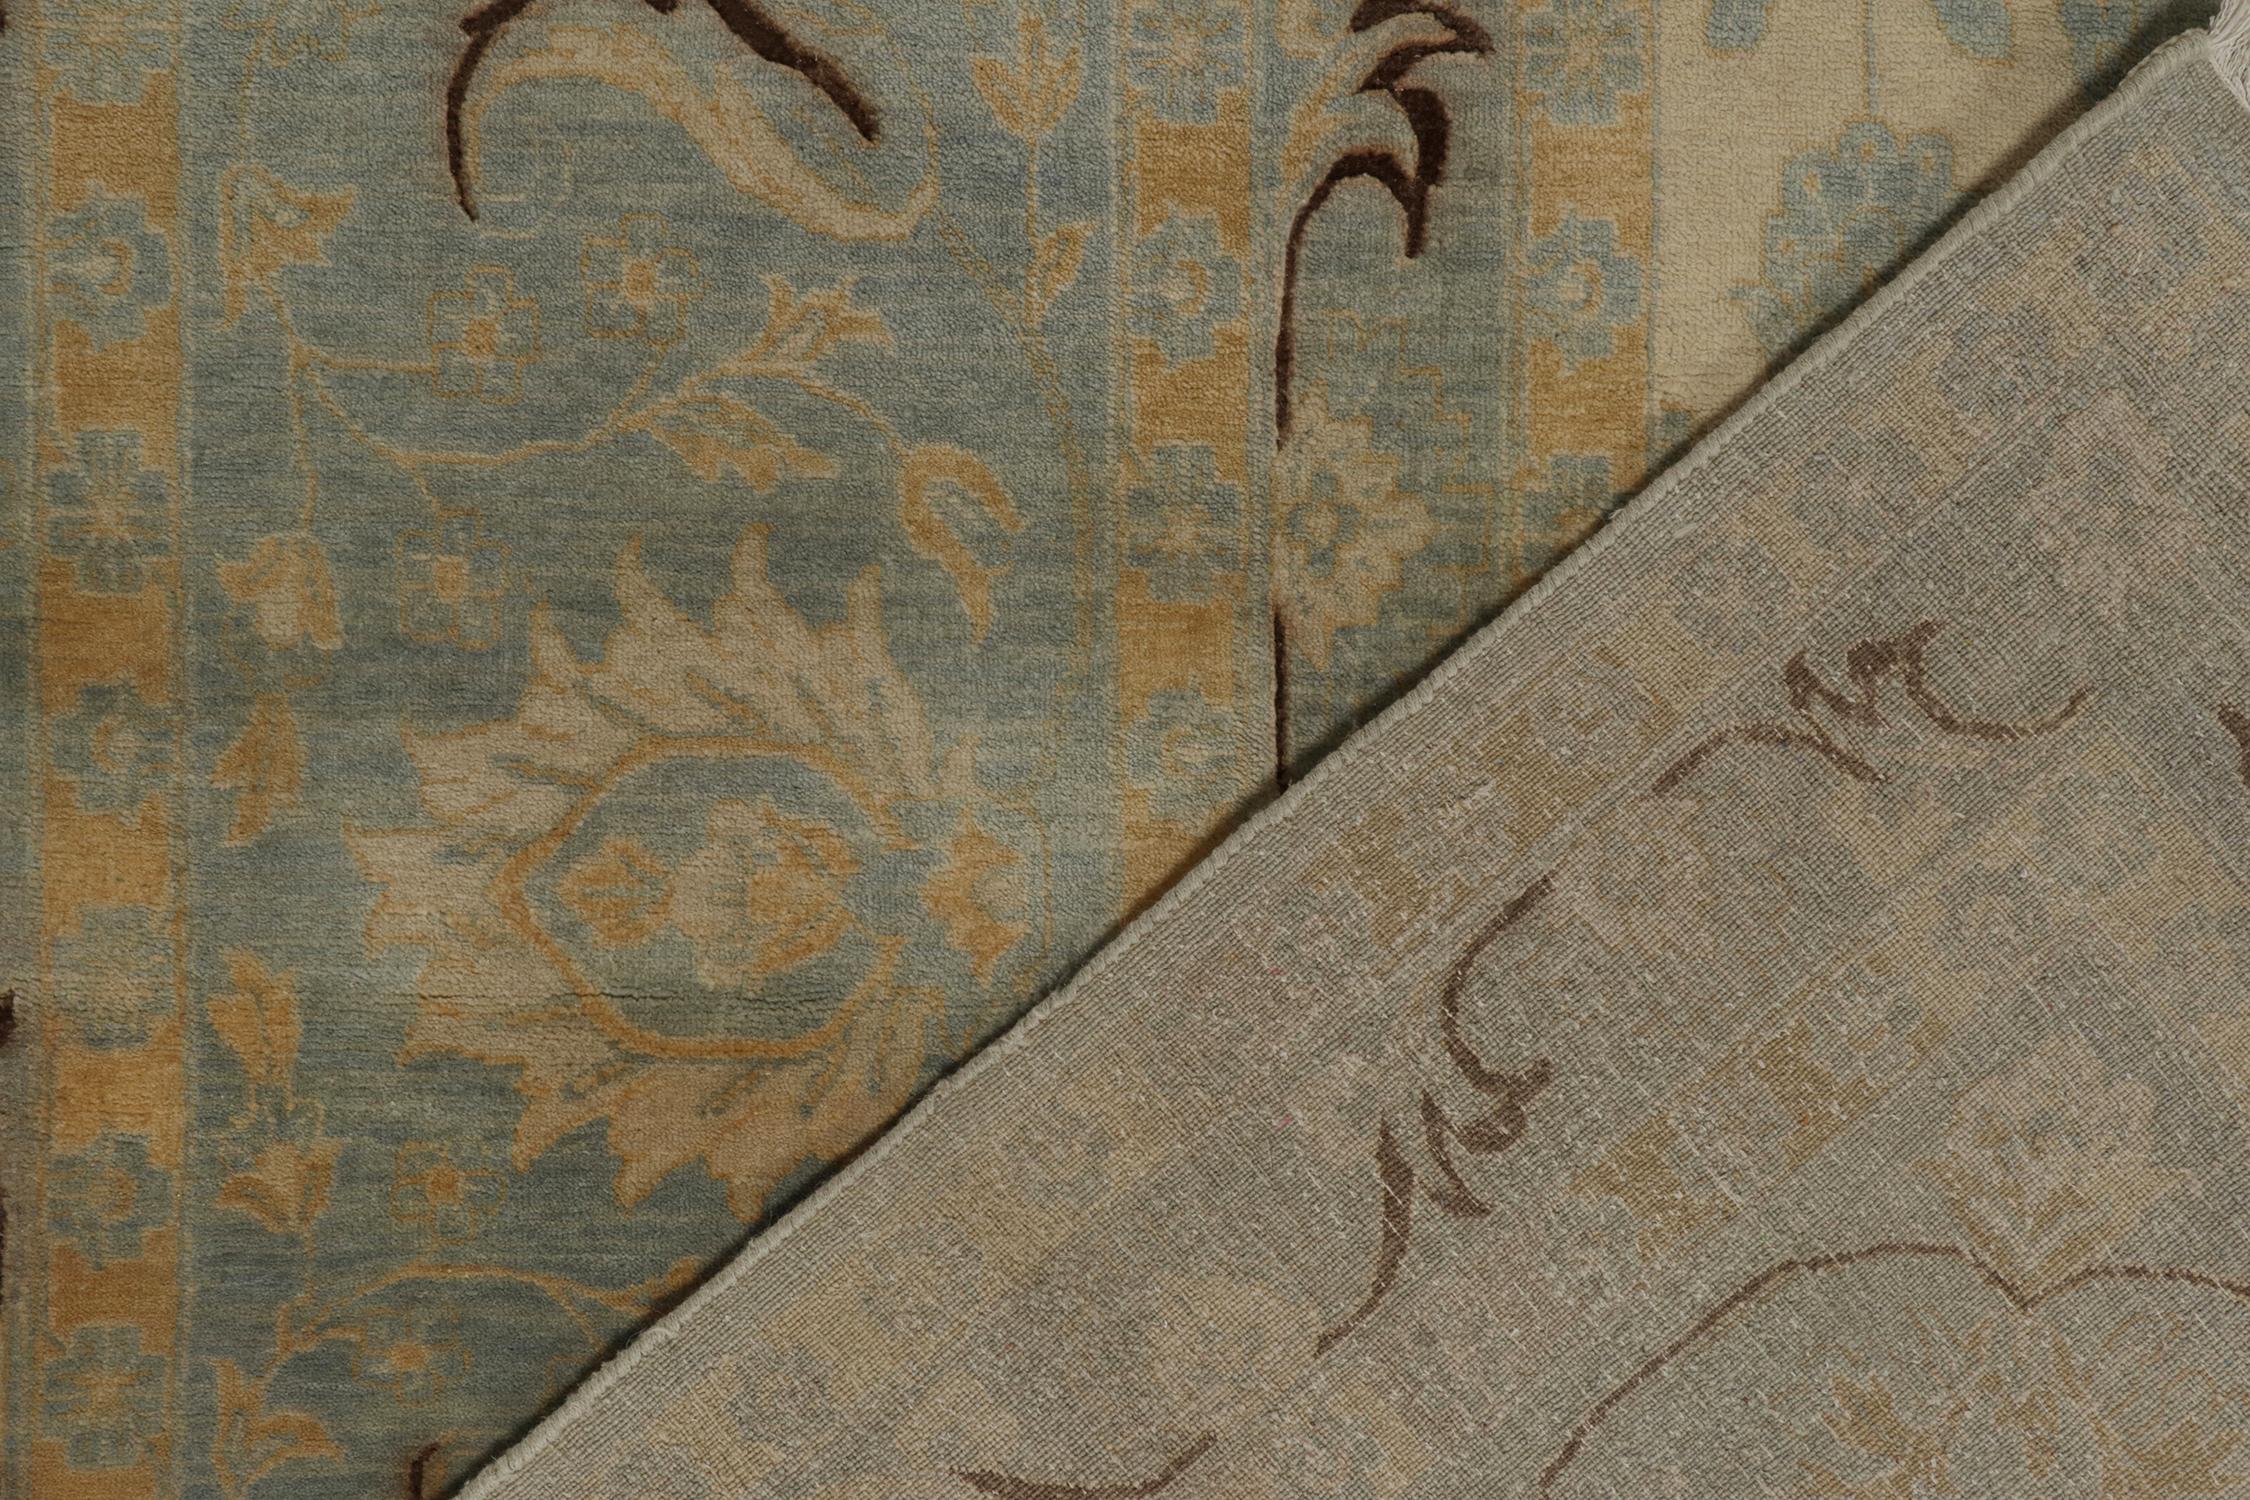 Contemporary Rug & Kilim’s Persian Style Rug in Blue, Beige-Brown and Gold Floral Pattern For Sale